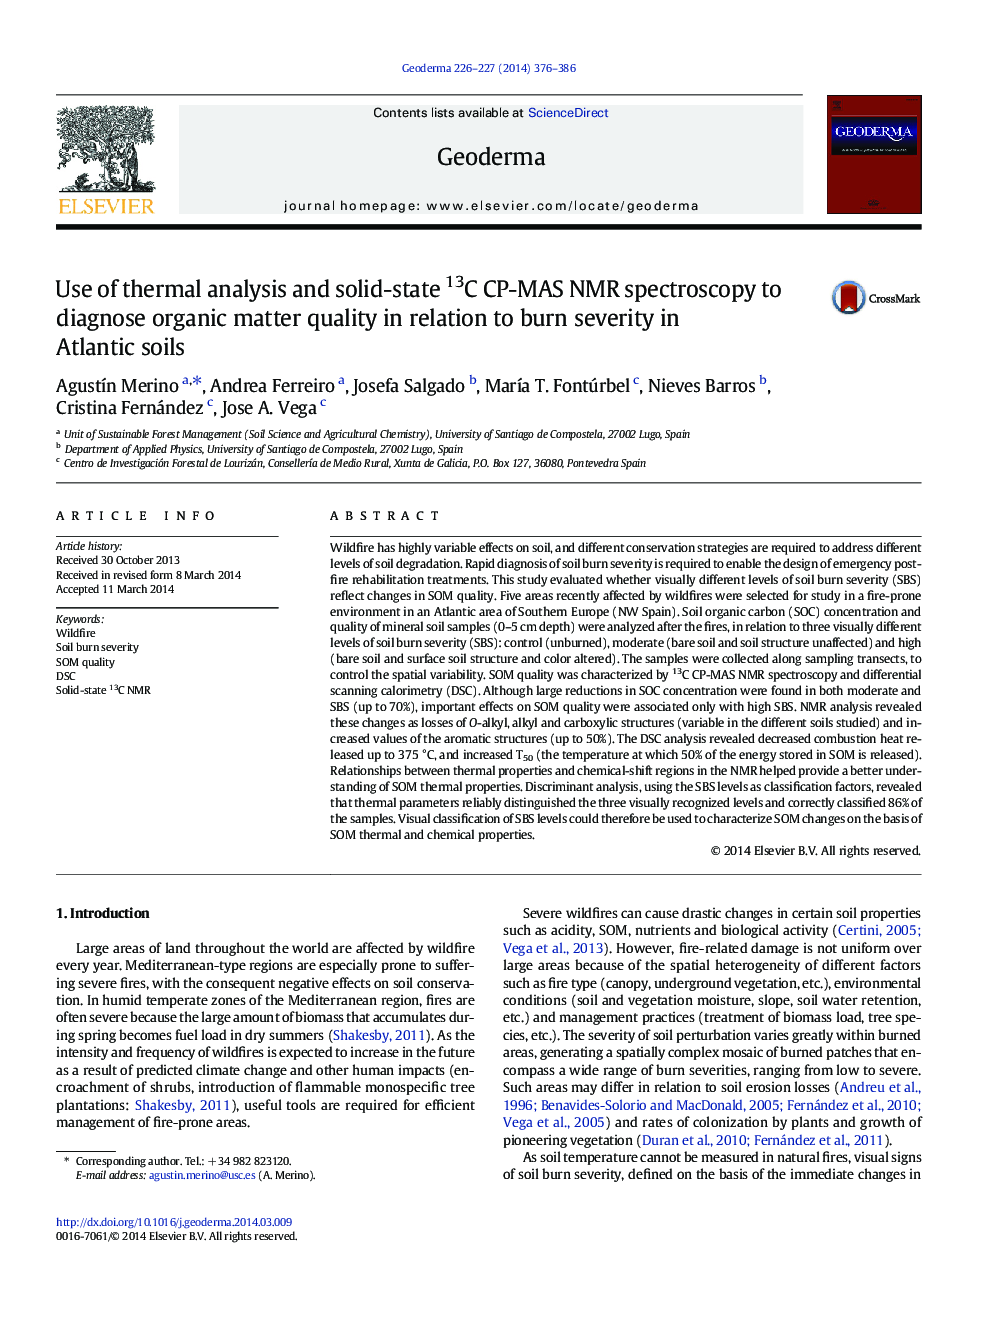 Use of thermal analysis and solid-state 13C CP-MAS NMR spectroscopy to diagnose organic matter quality in relation to burn severity in Atlantic soils